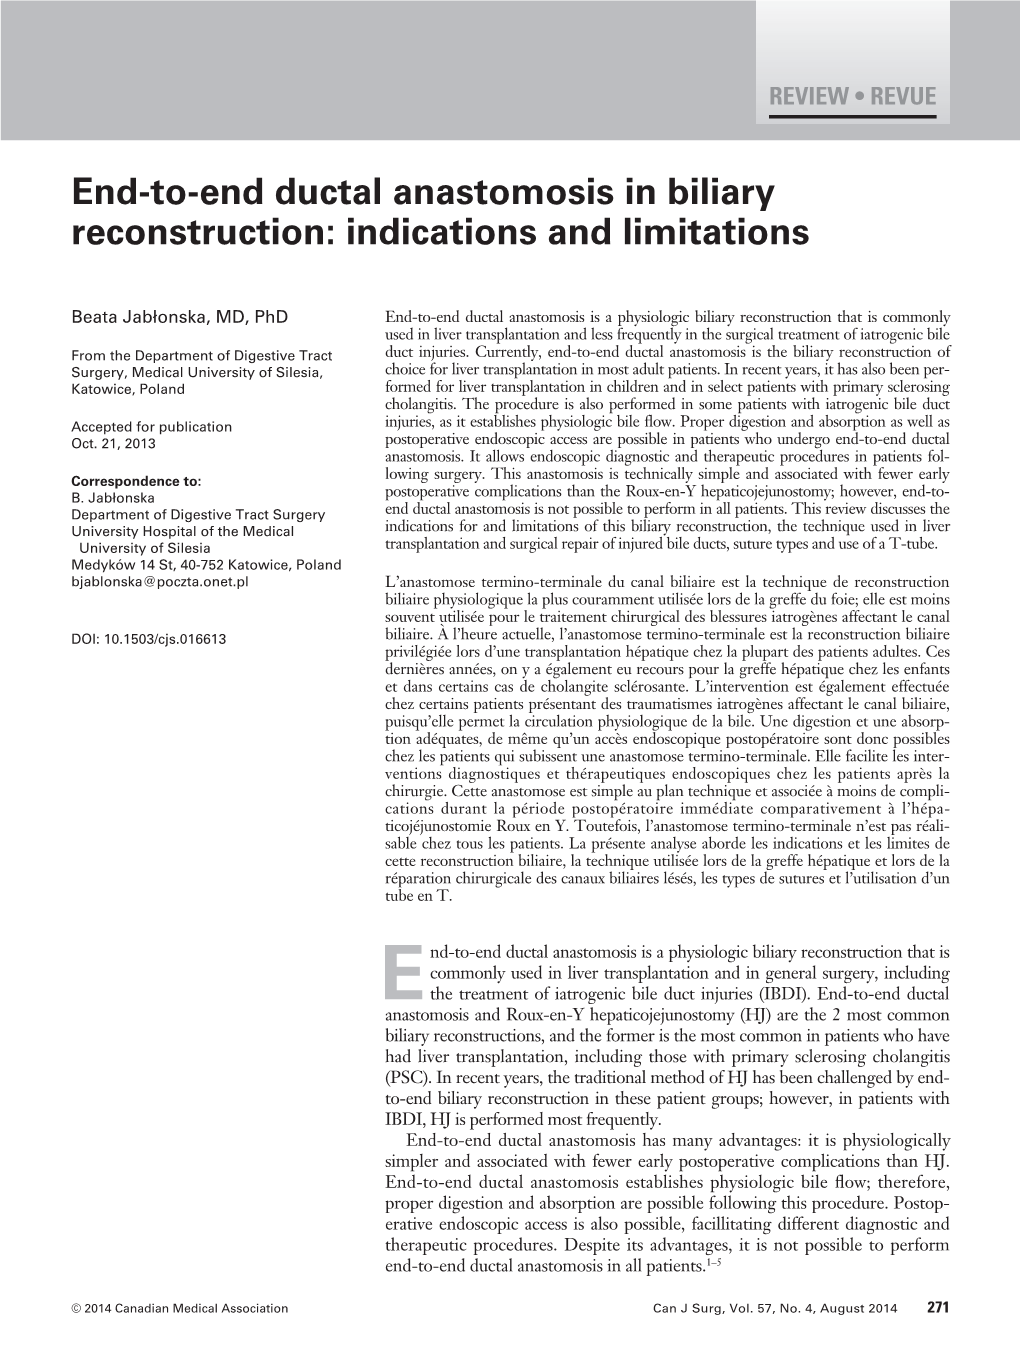 End-To-End Ductal Anastomosis in Biliary Reconstruction: Indications and Limitations